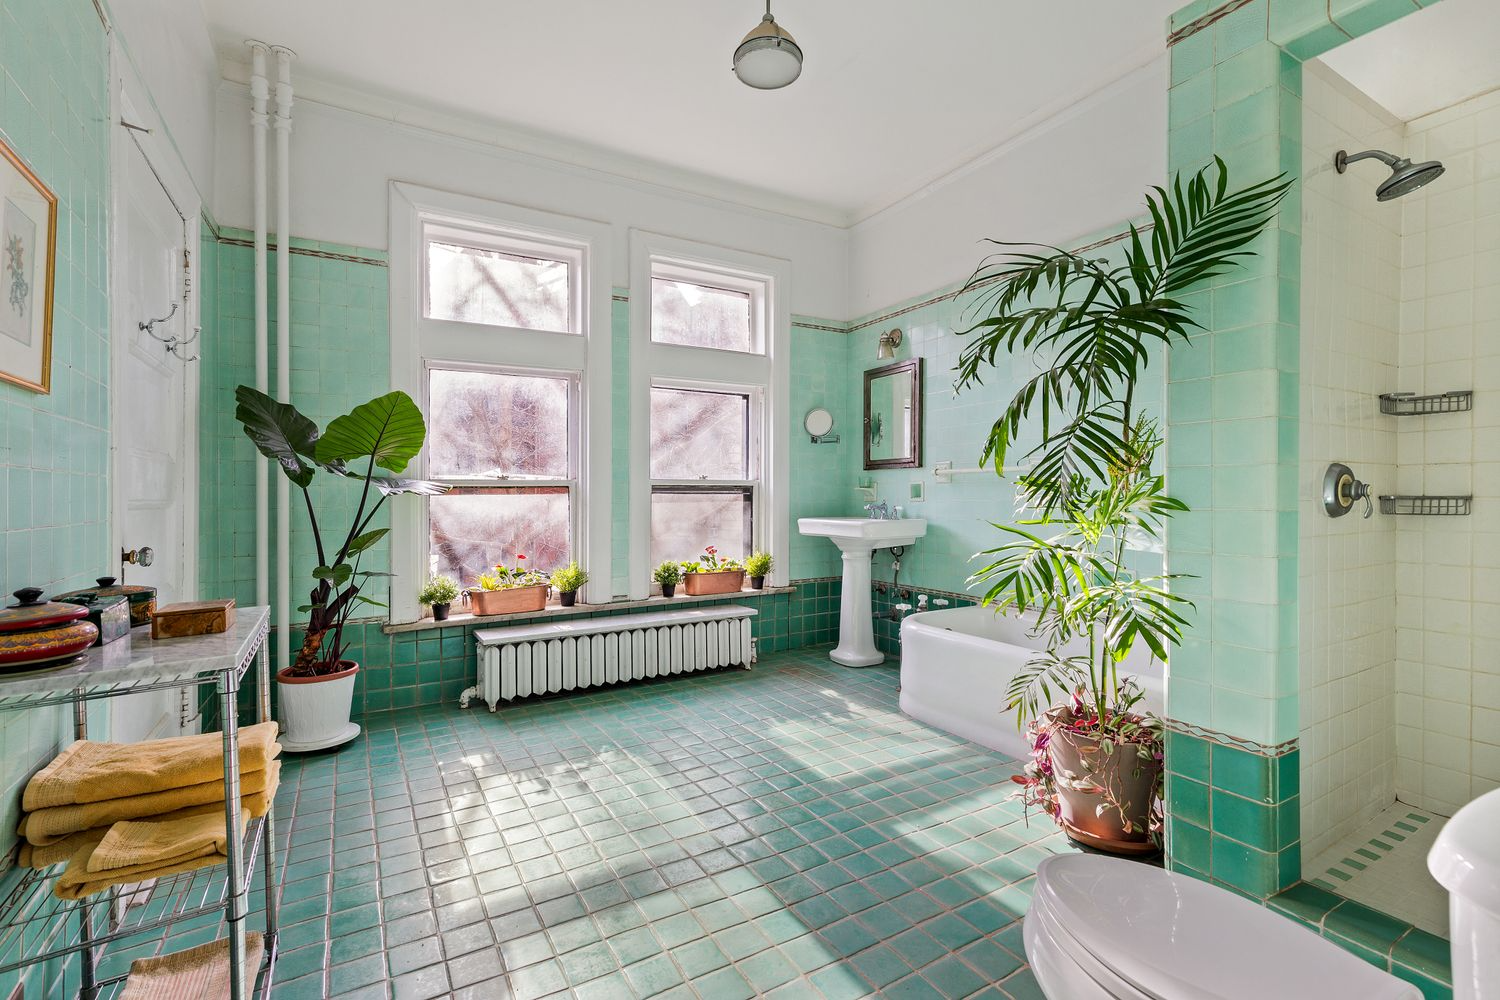 large bathroom with white fixtures and walls and floor of jade green tile